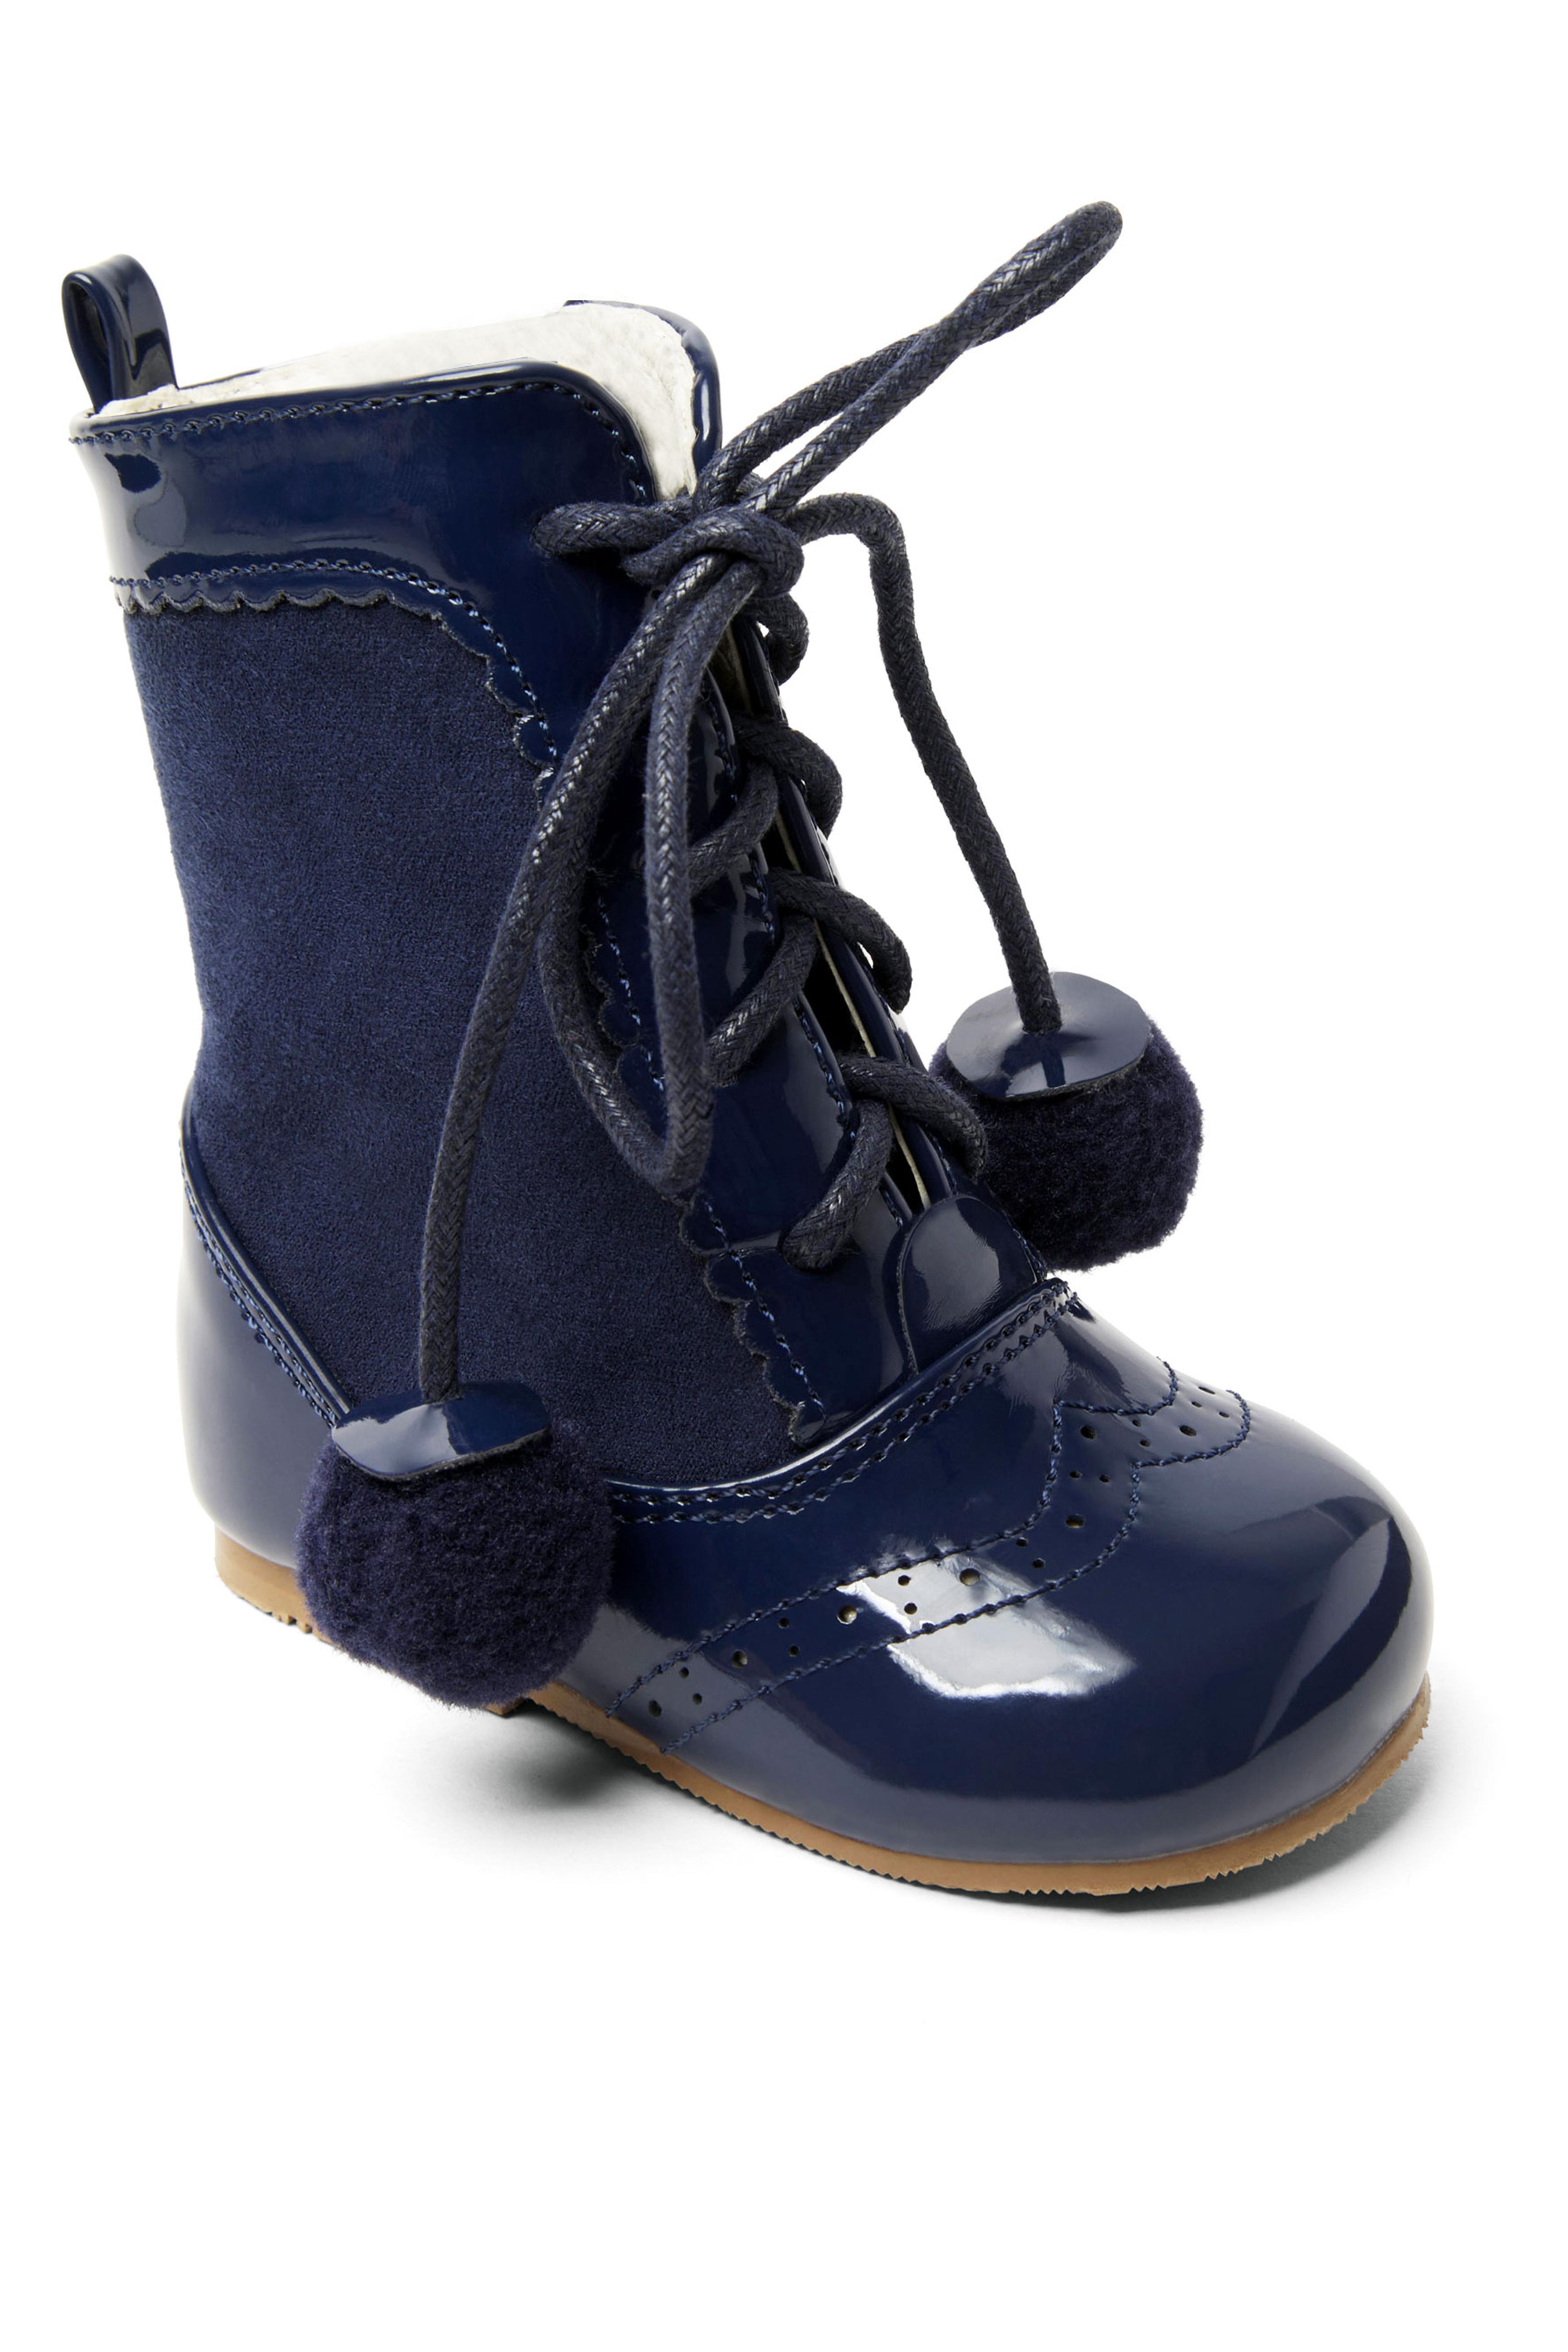 Kids Patent Leather Brogue Unisex Lace-up Boots - SIENNA - Navy Blue